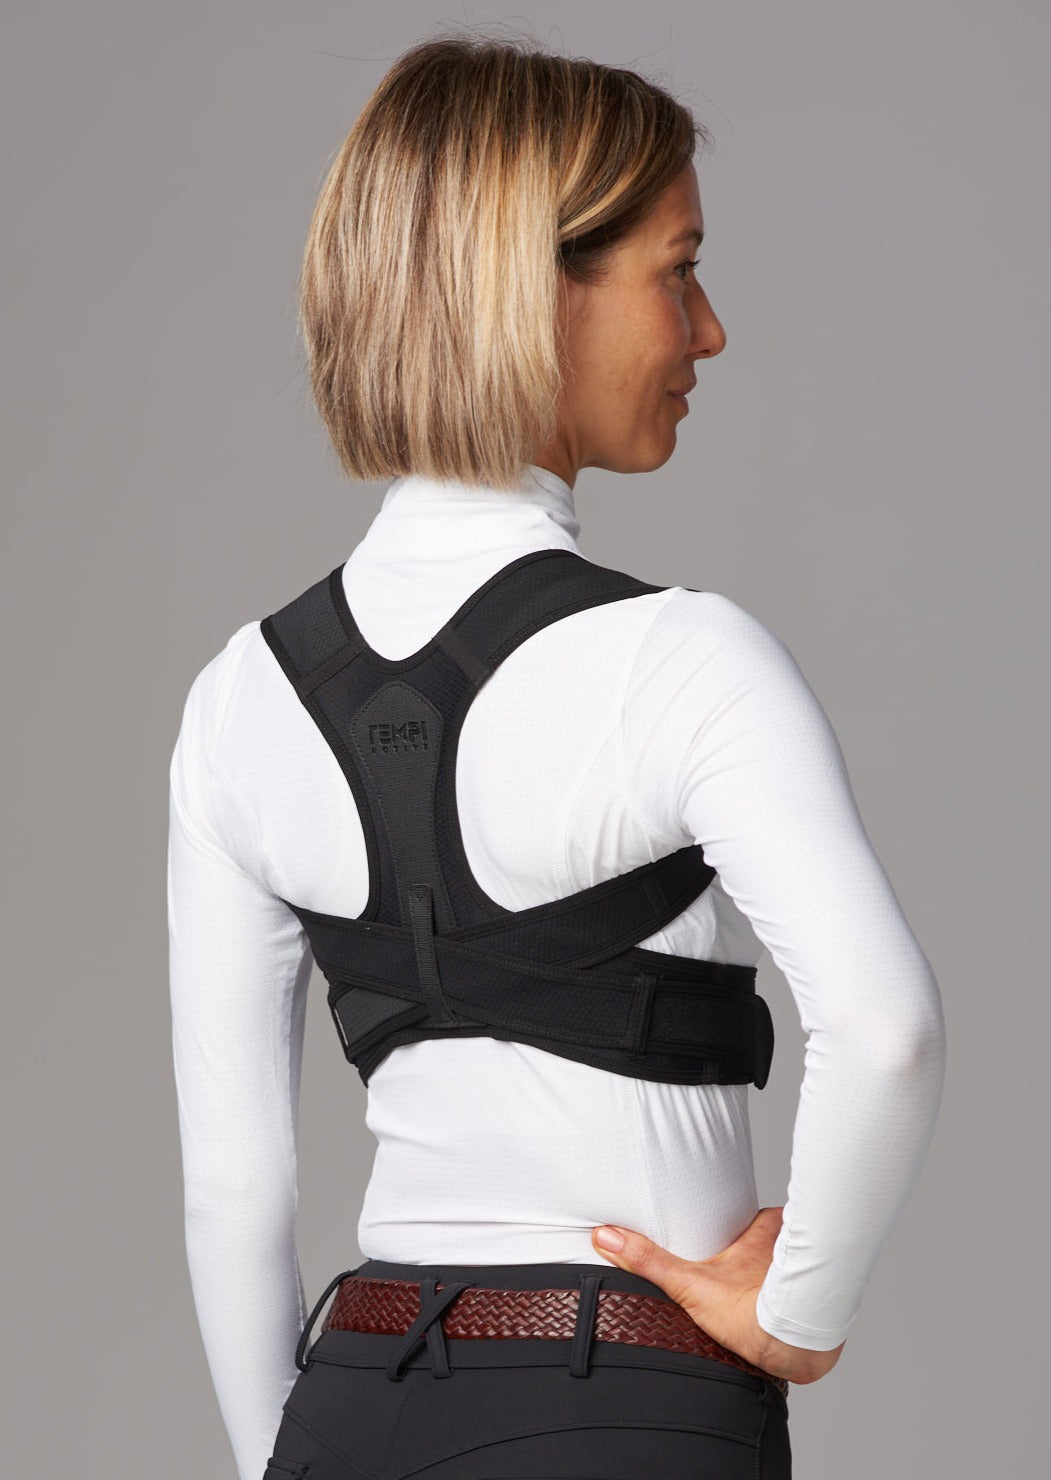 Equestrian Posture Brace from TEMPI ACTIVE®